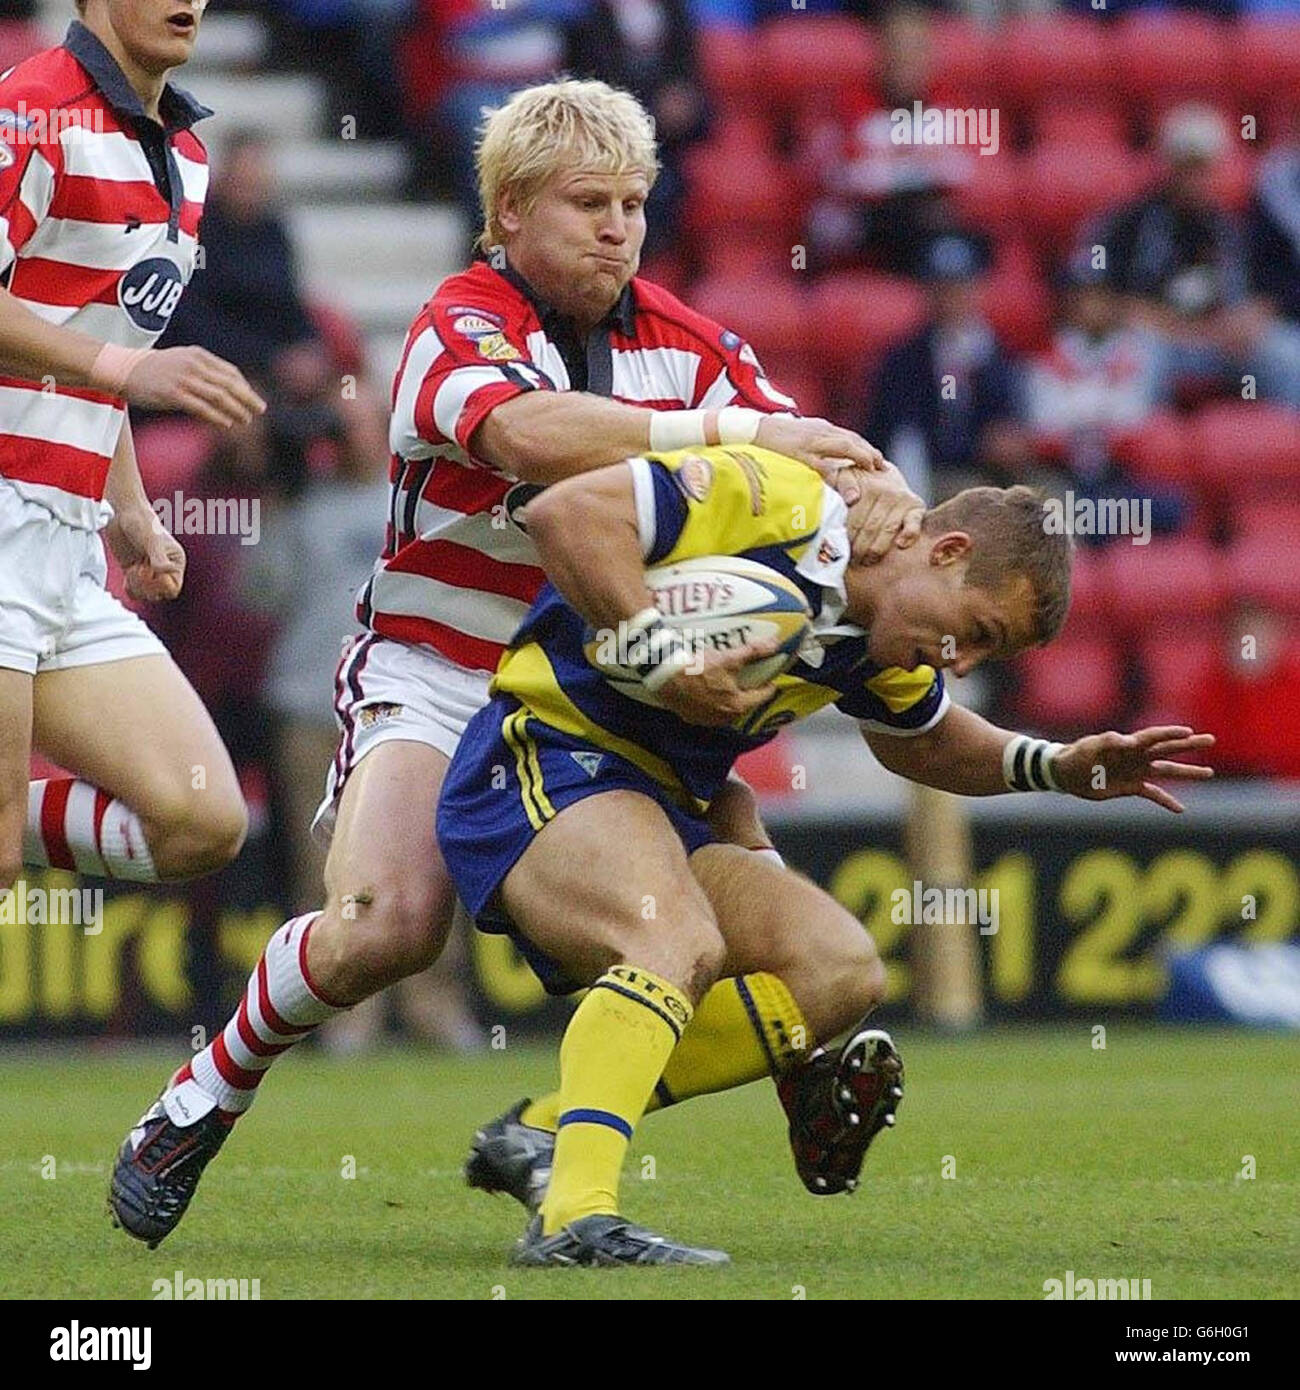 Warrington's Dean Gaskell is tackled by Wigan's Mick Cassidy during the Tetley's Super League play-off at the JJB Stadium, Wigan. Stock Photo